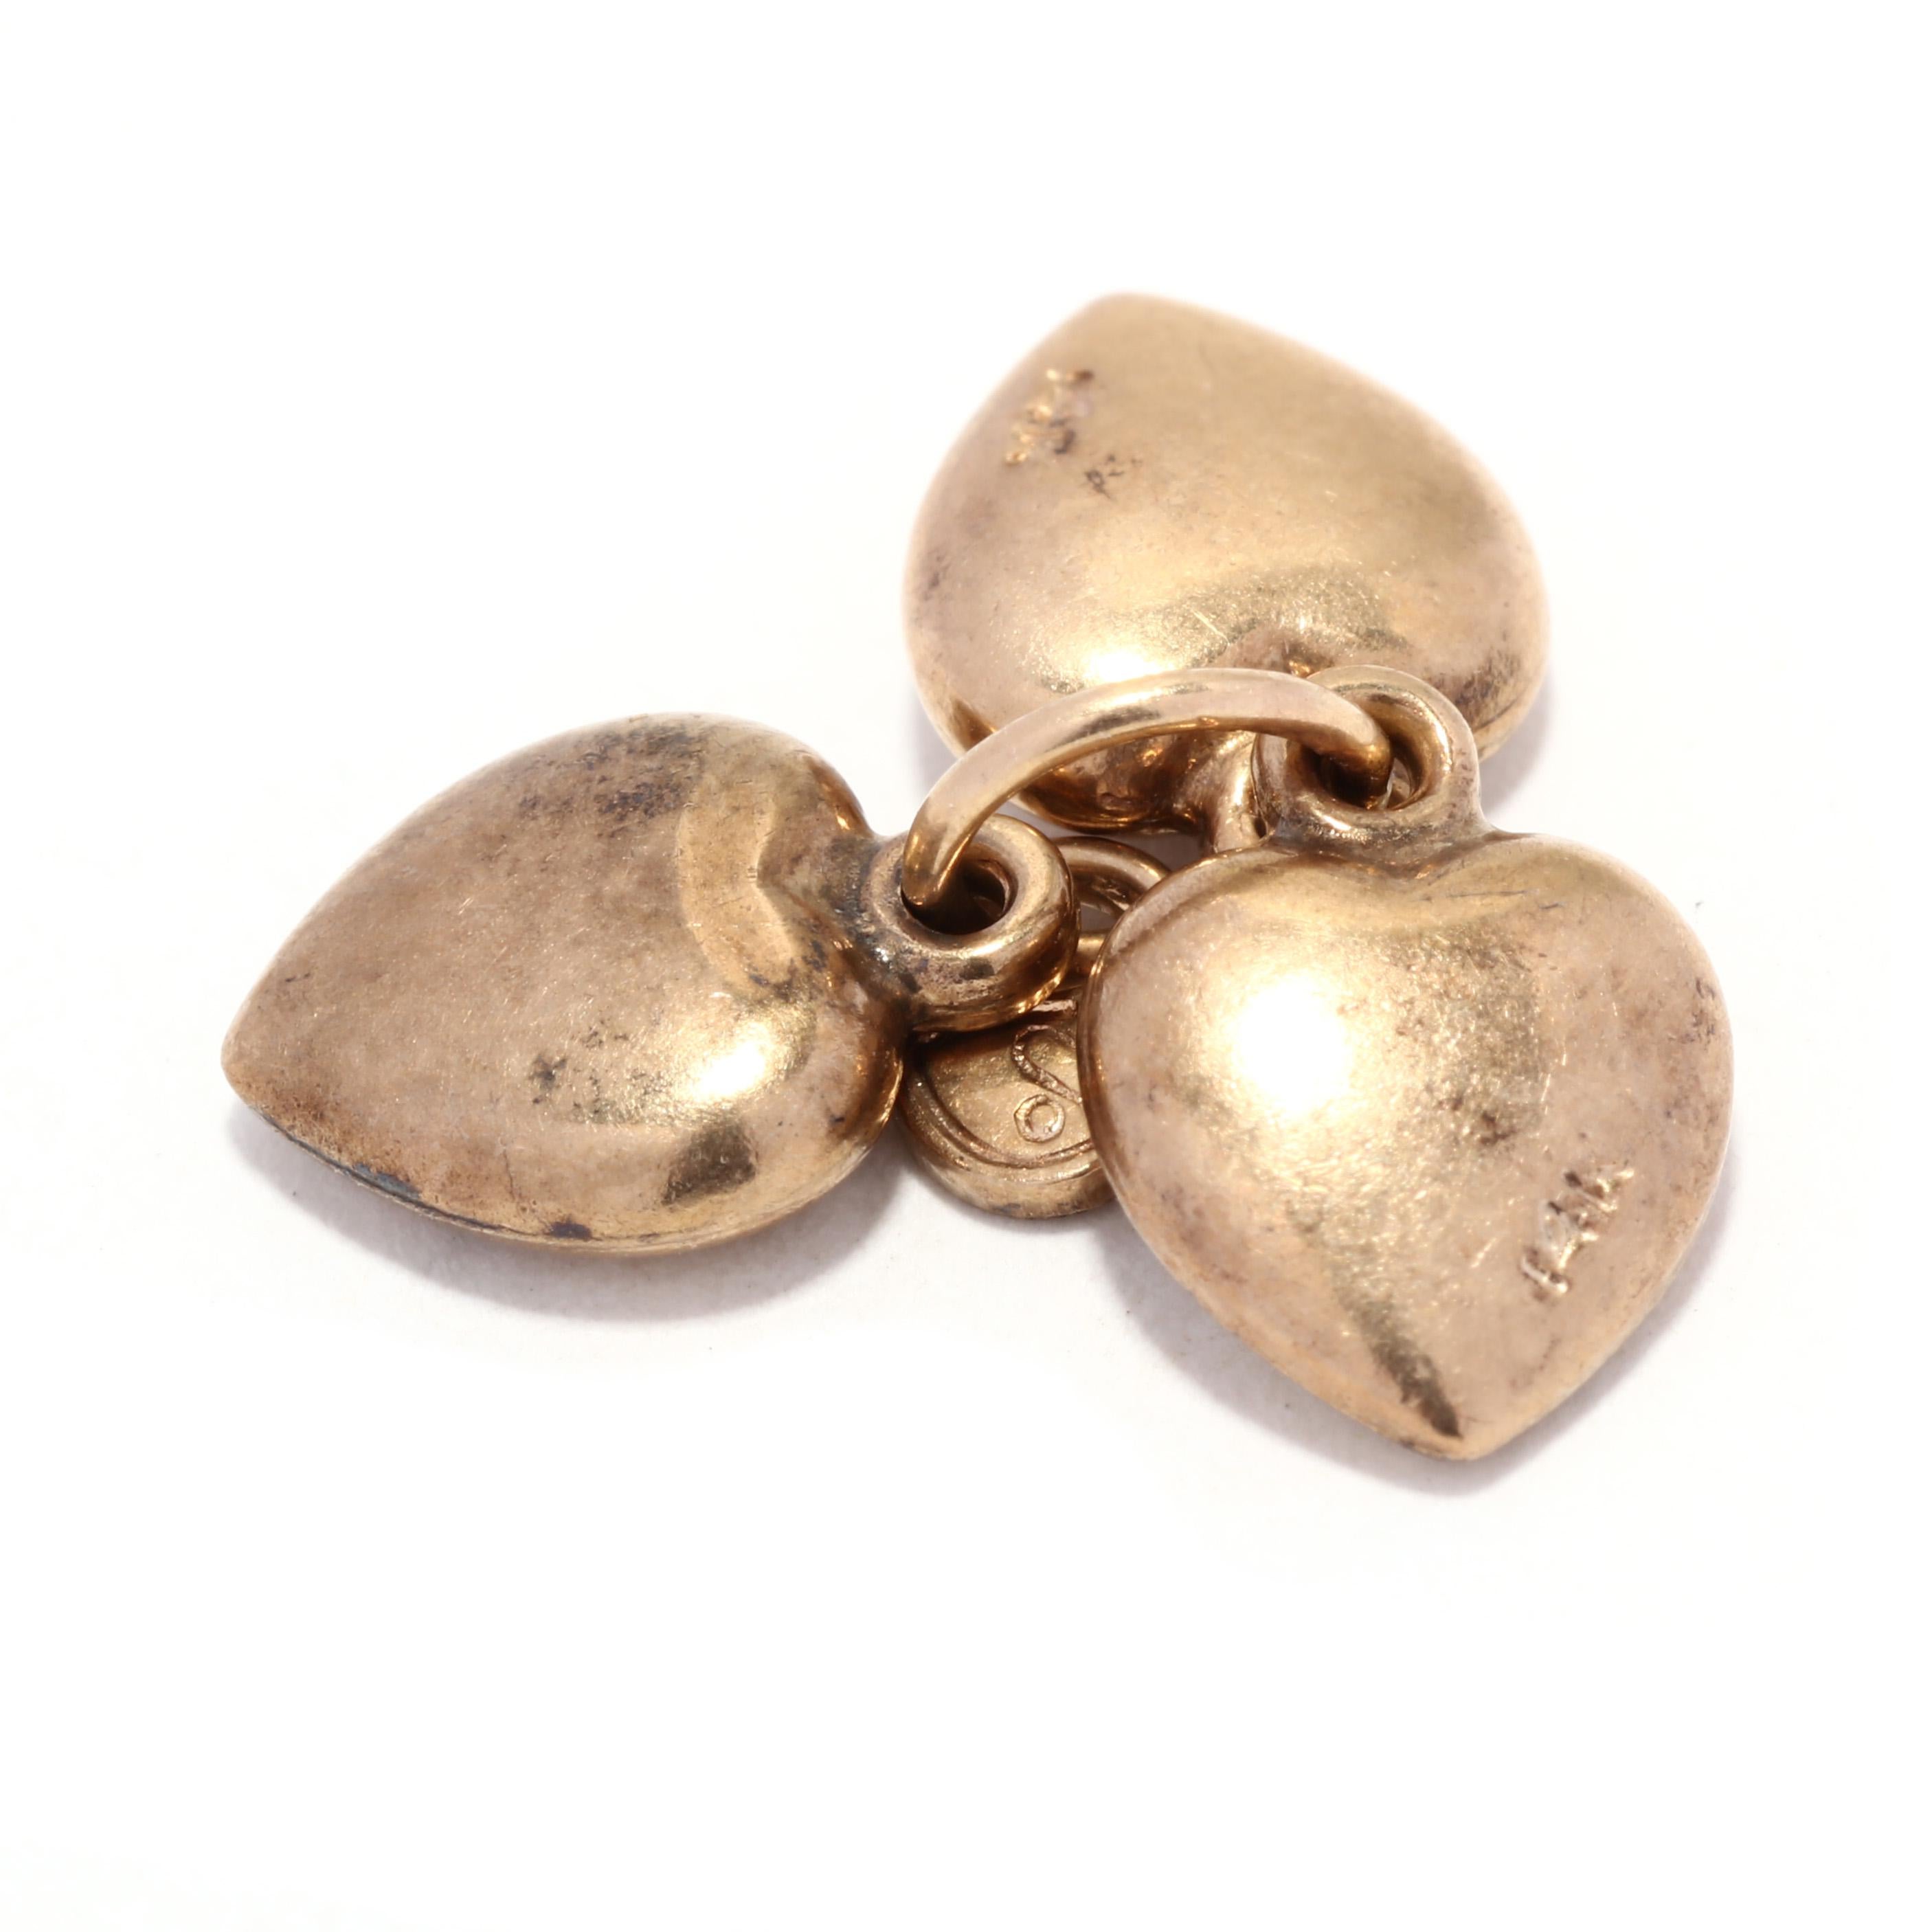 An antique 14 karat yellow gold three heart charm. This small gold charm features three small puff hearts suspended from a single ring with tiny lock motif charm.

Length: 1/2 in.

Weight: 1 dwts. / 1.7 grams

Stamps: 14K

Ring Sizings &